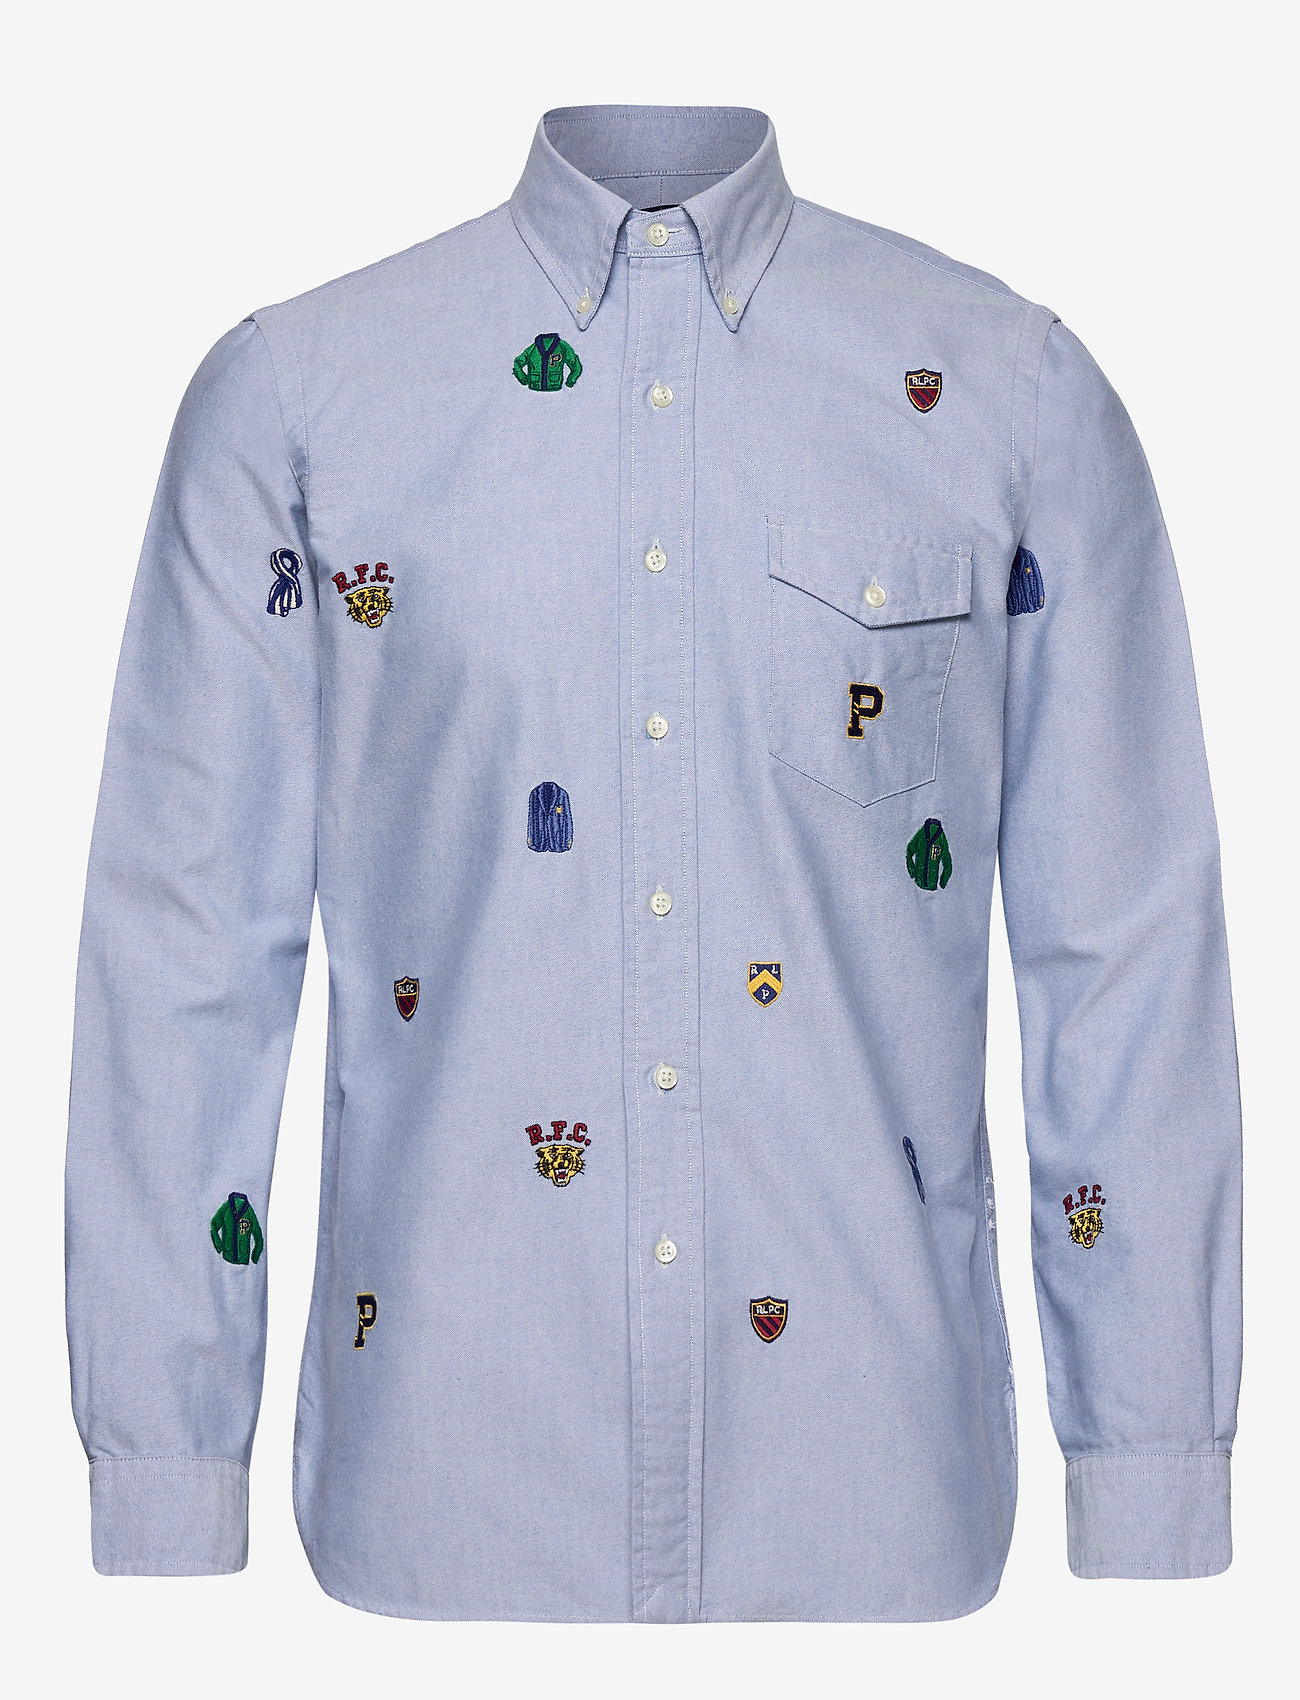 Custom Fit Embroidered Shirt (4374 Bsr 